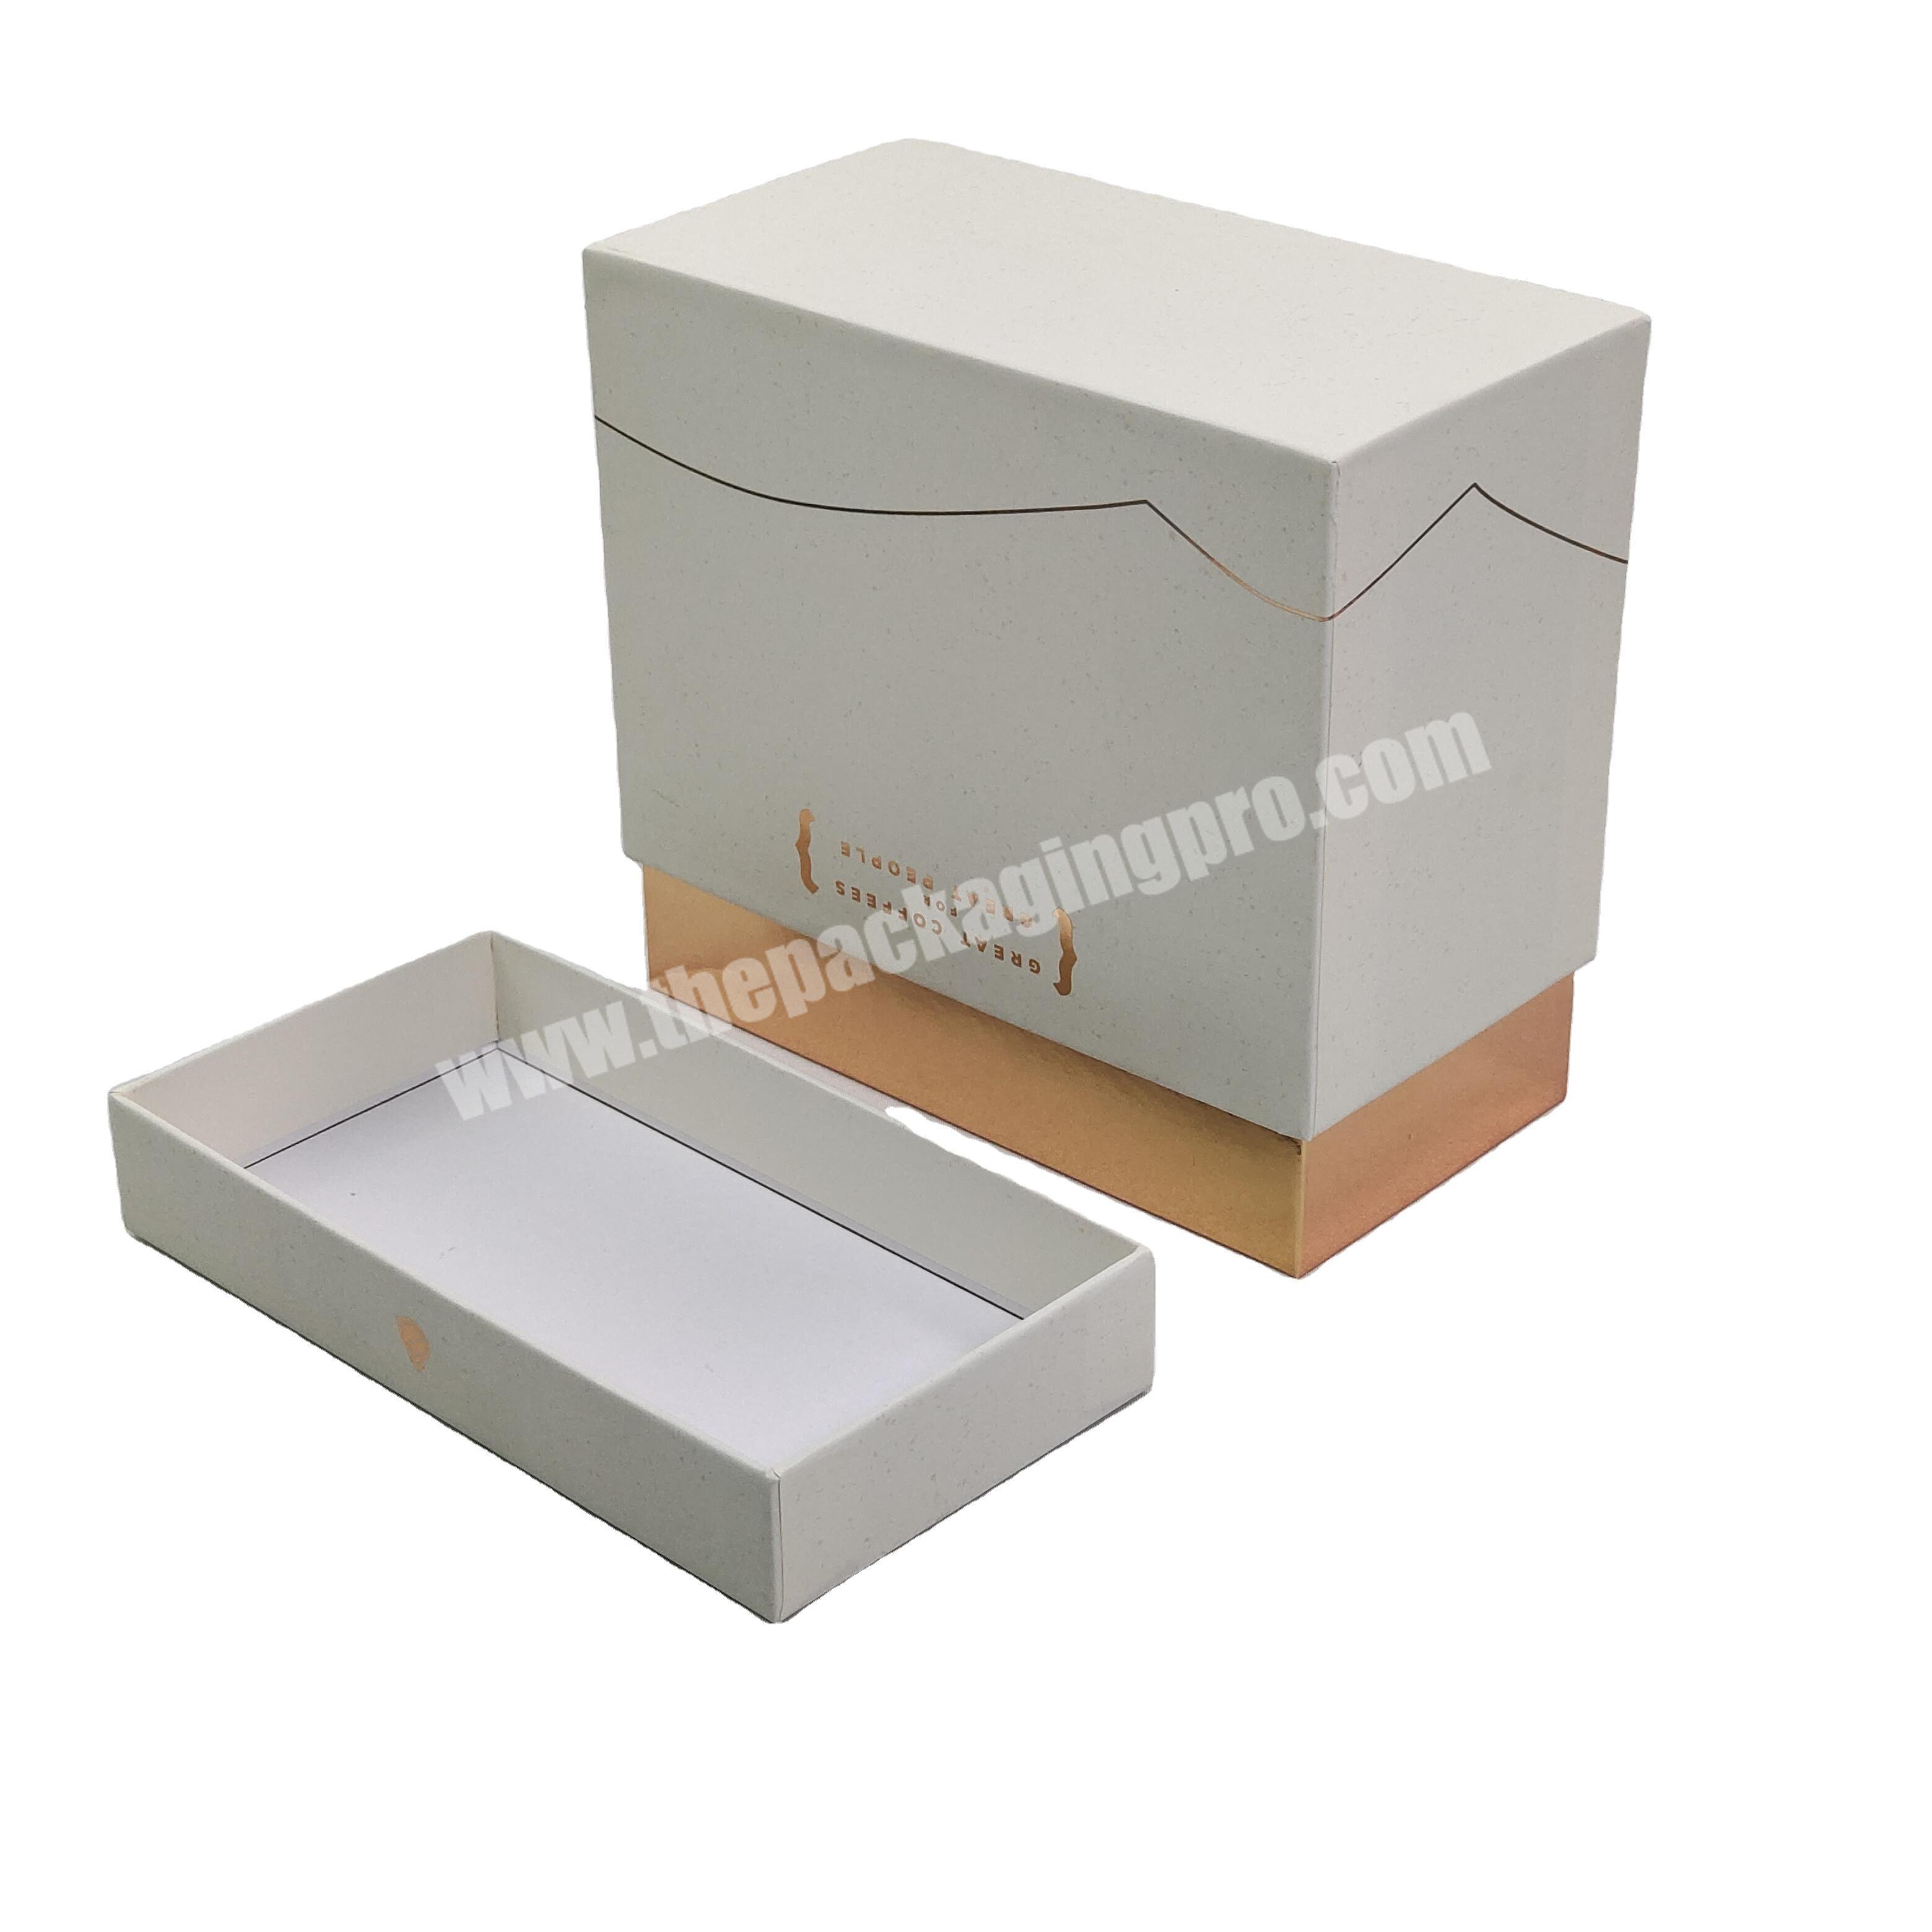 2022 new quality stamped logo luxury gift box